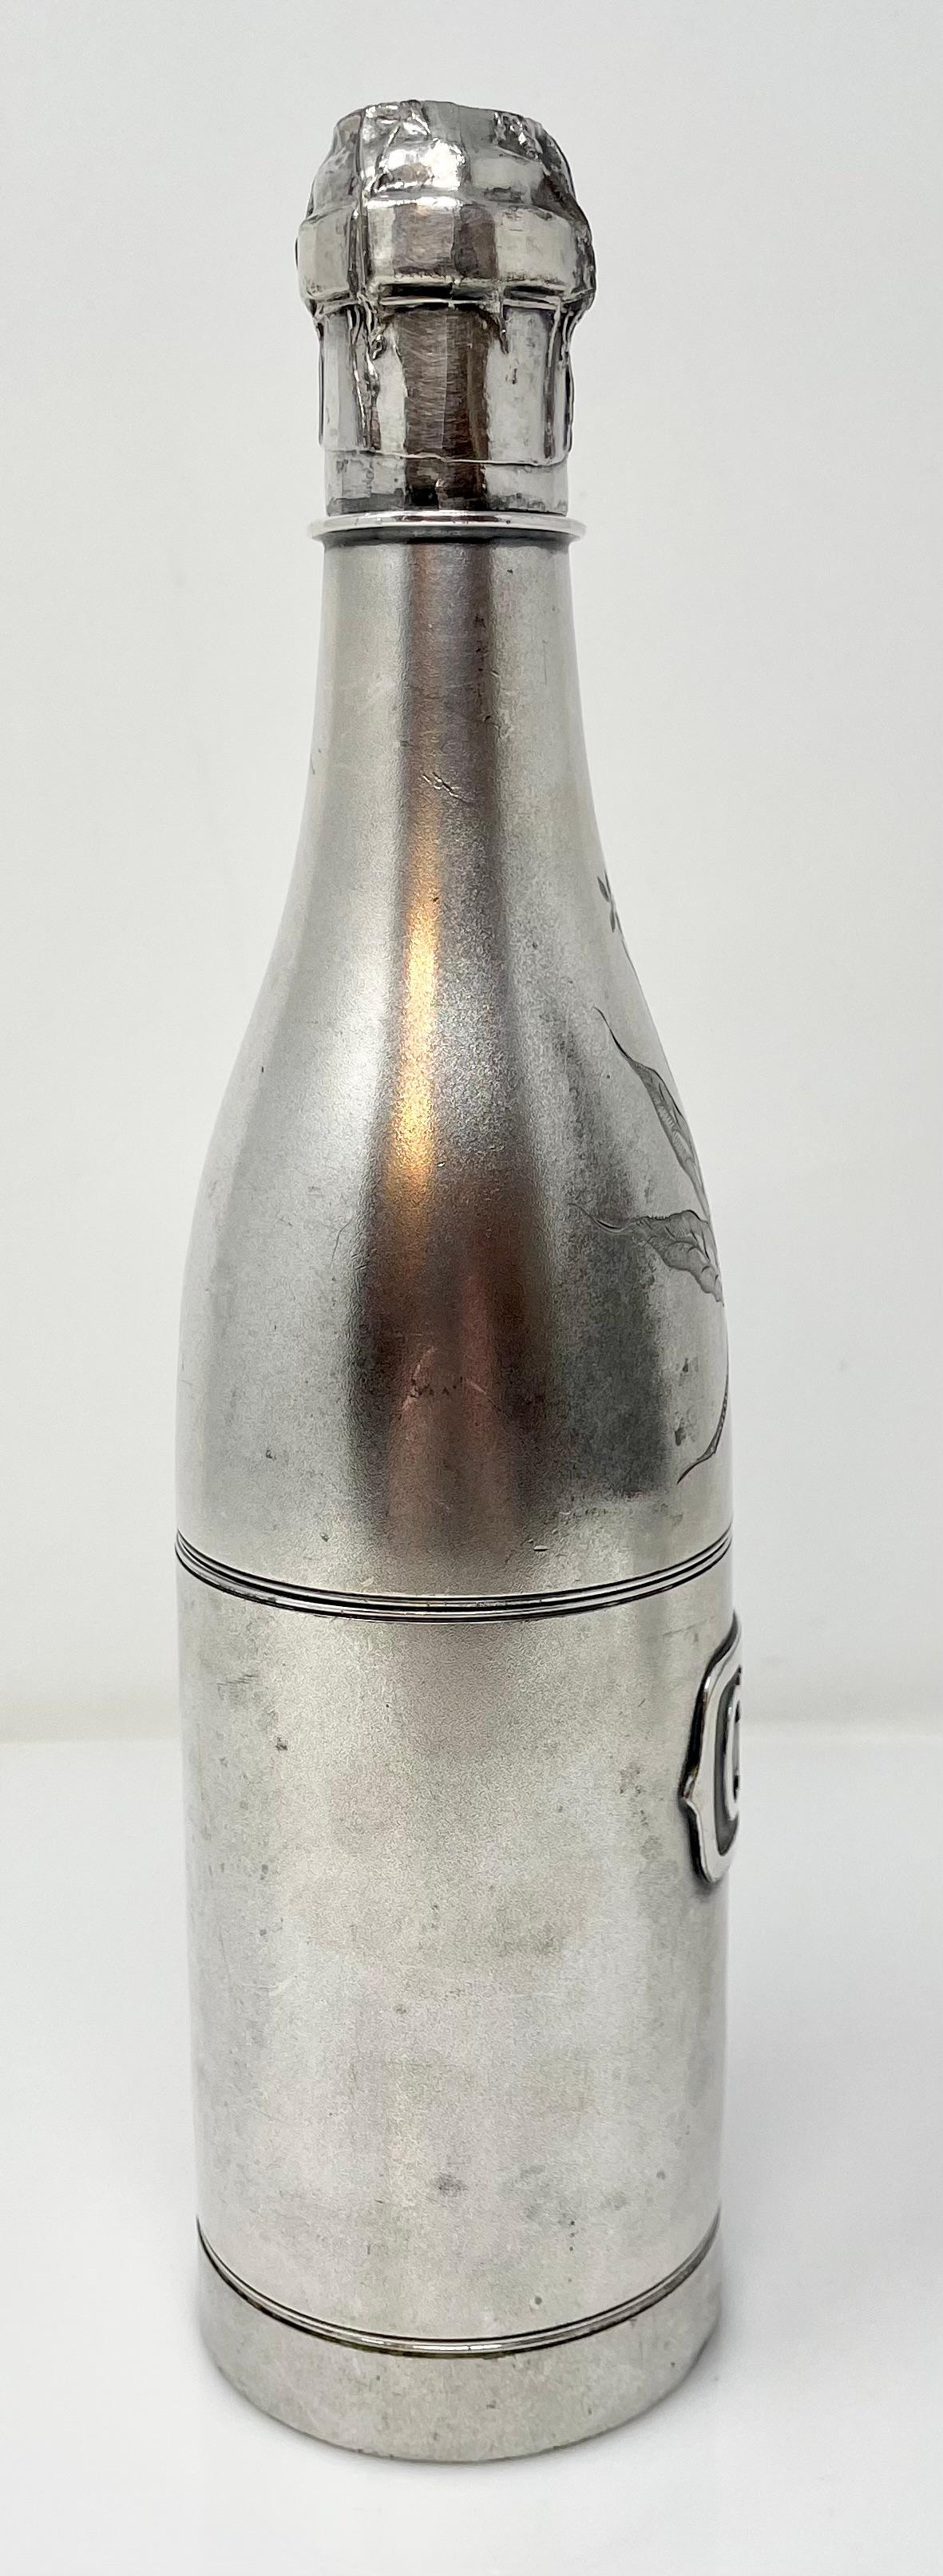 Antique American silver-plated cigar humidor champagne bottle, signed 